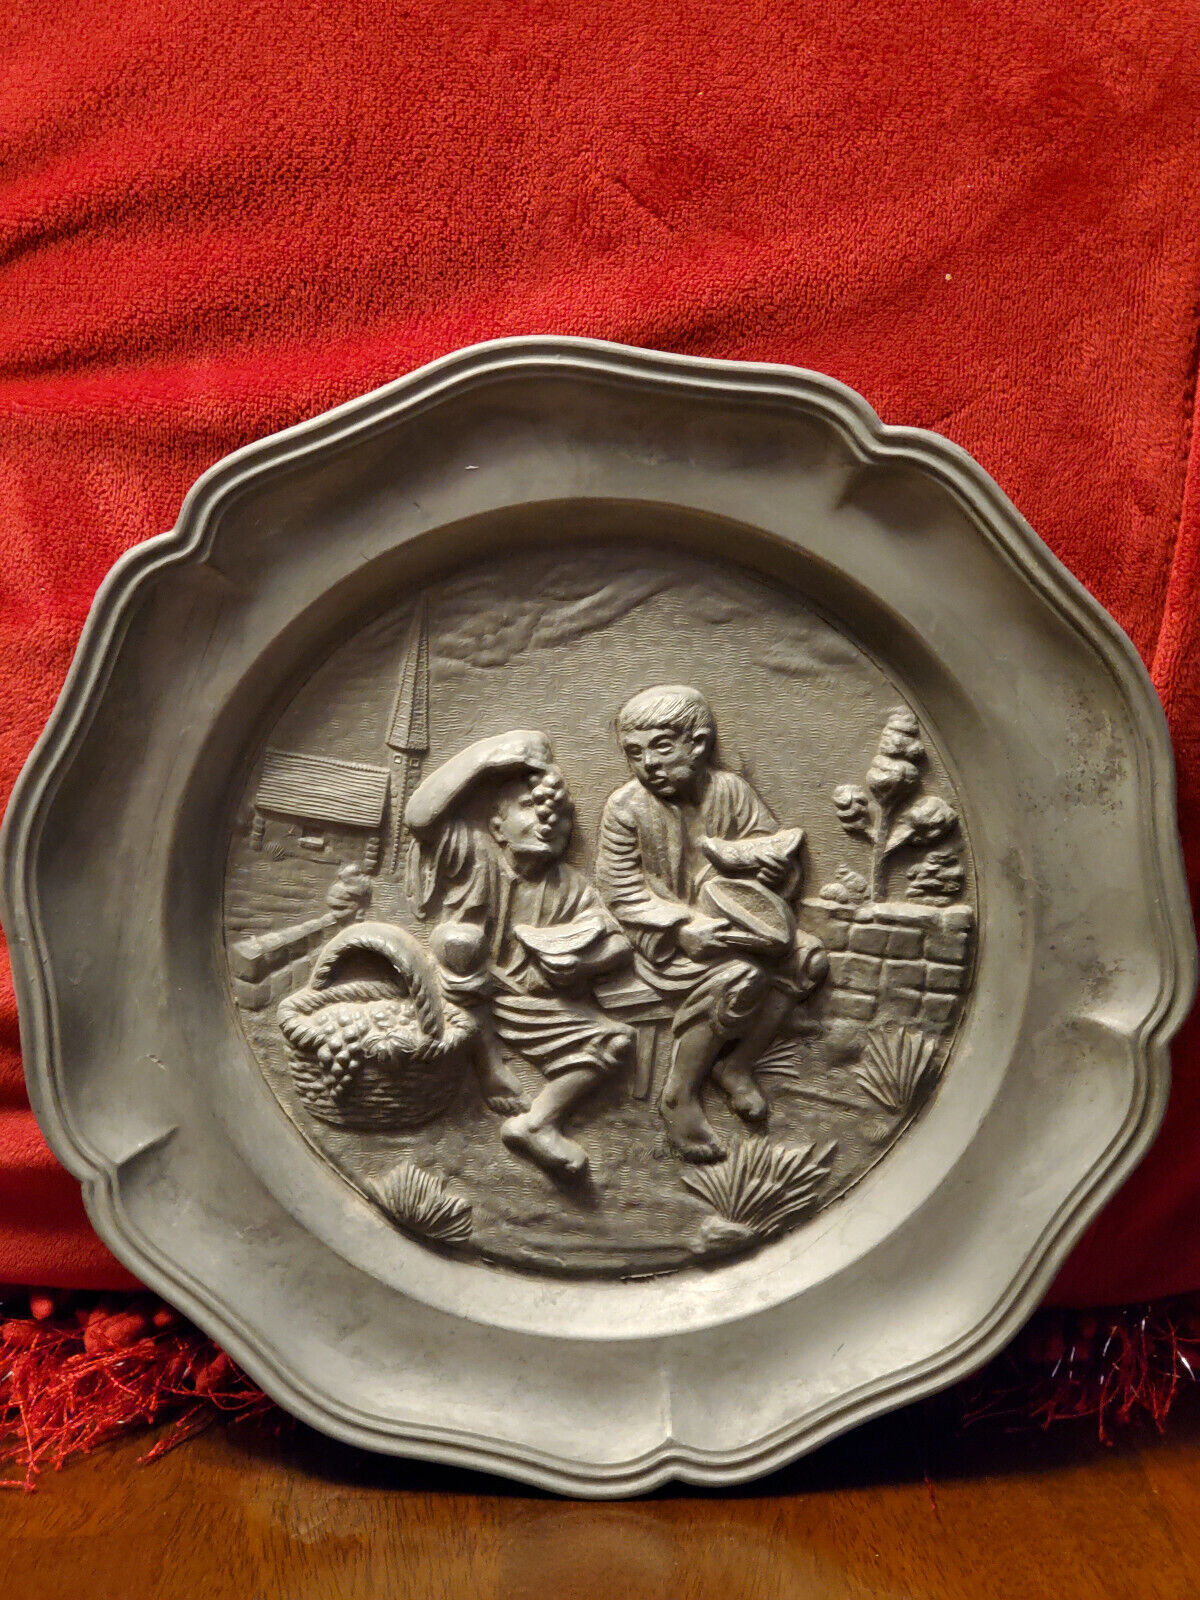 Vintage French Pewter Embossed Plate Metal Wall Hanging Relief Bowl Home Decor